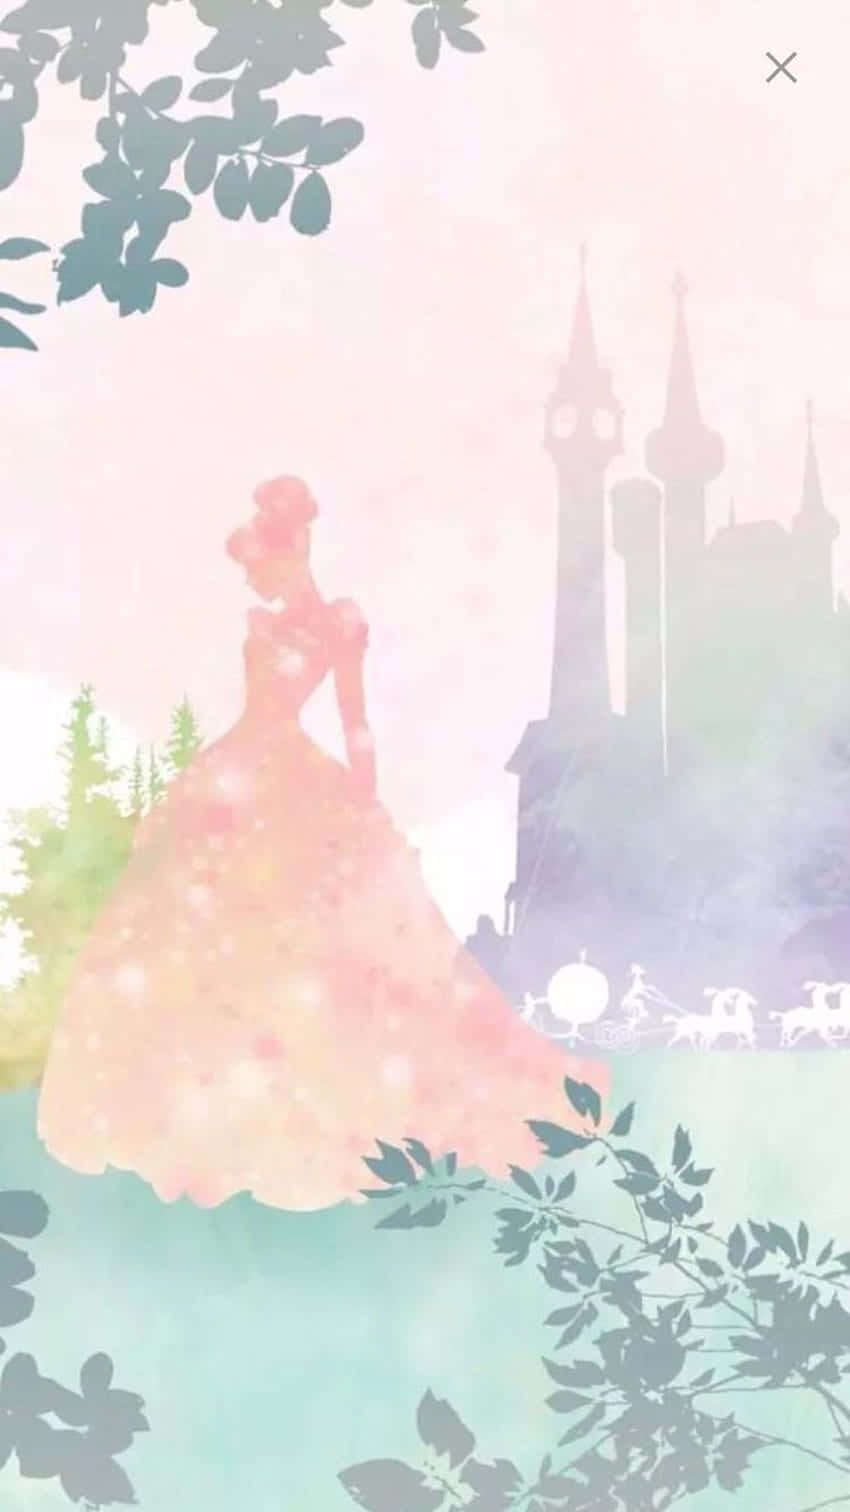 A Pink Princess In A Pink Dress Is Standing In The Water Wallpaper